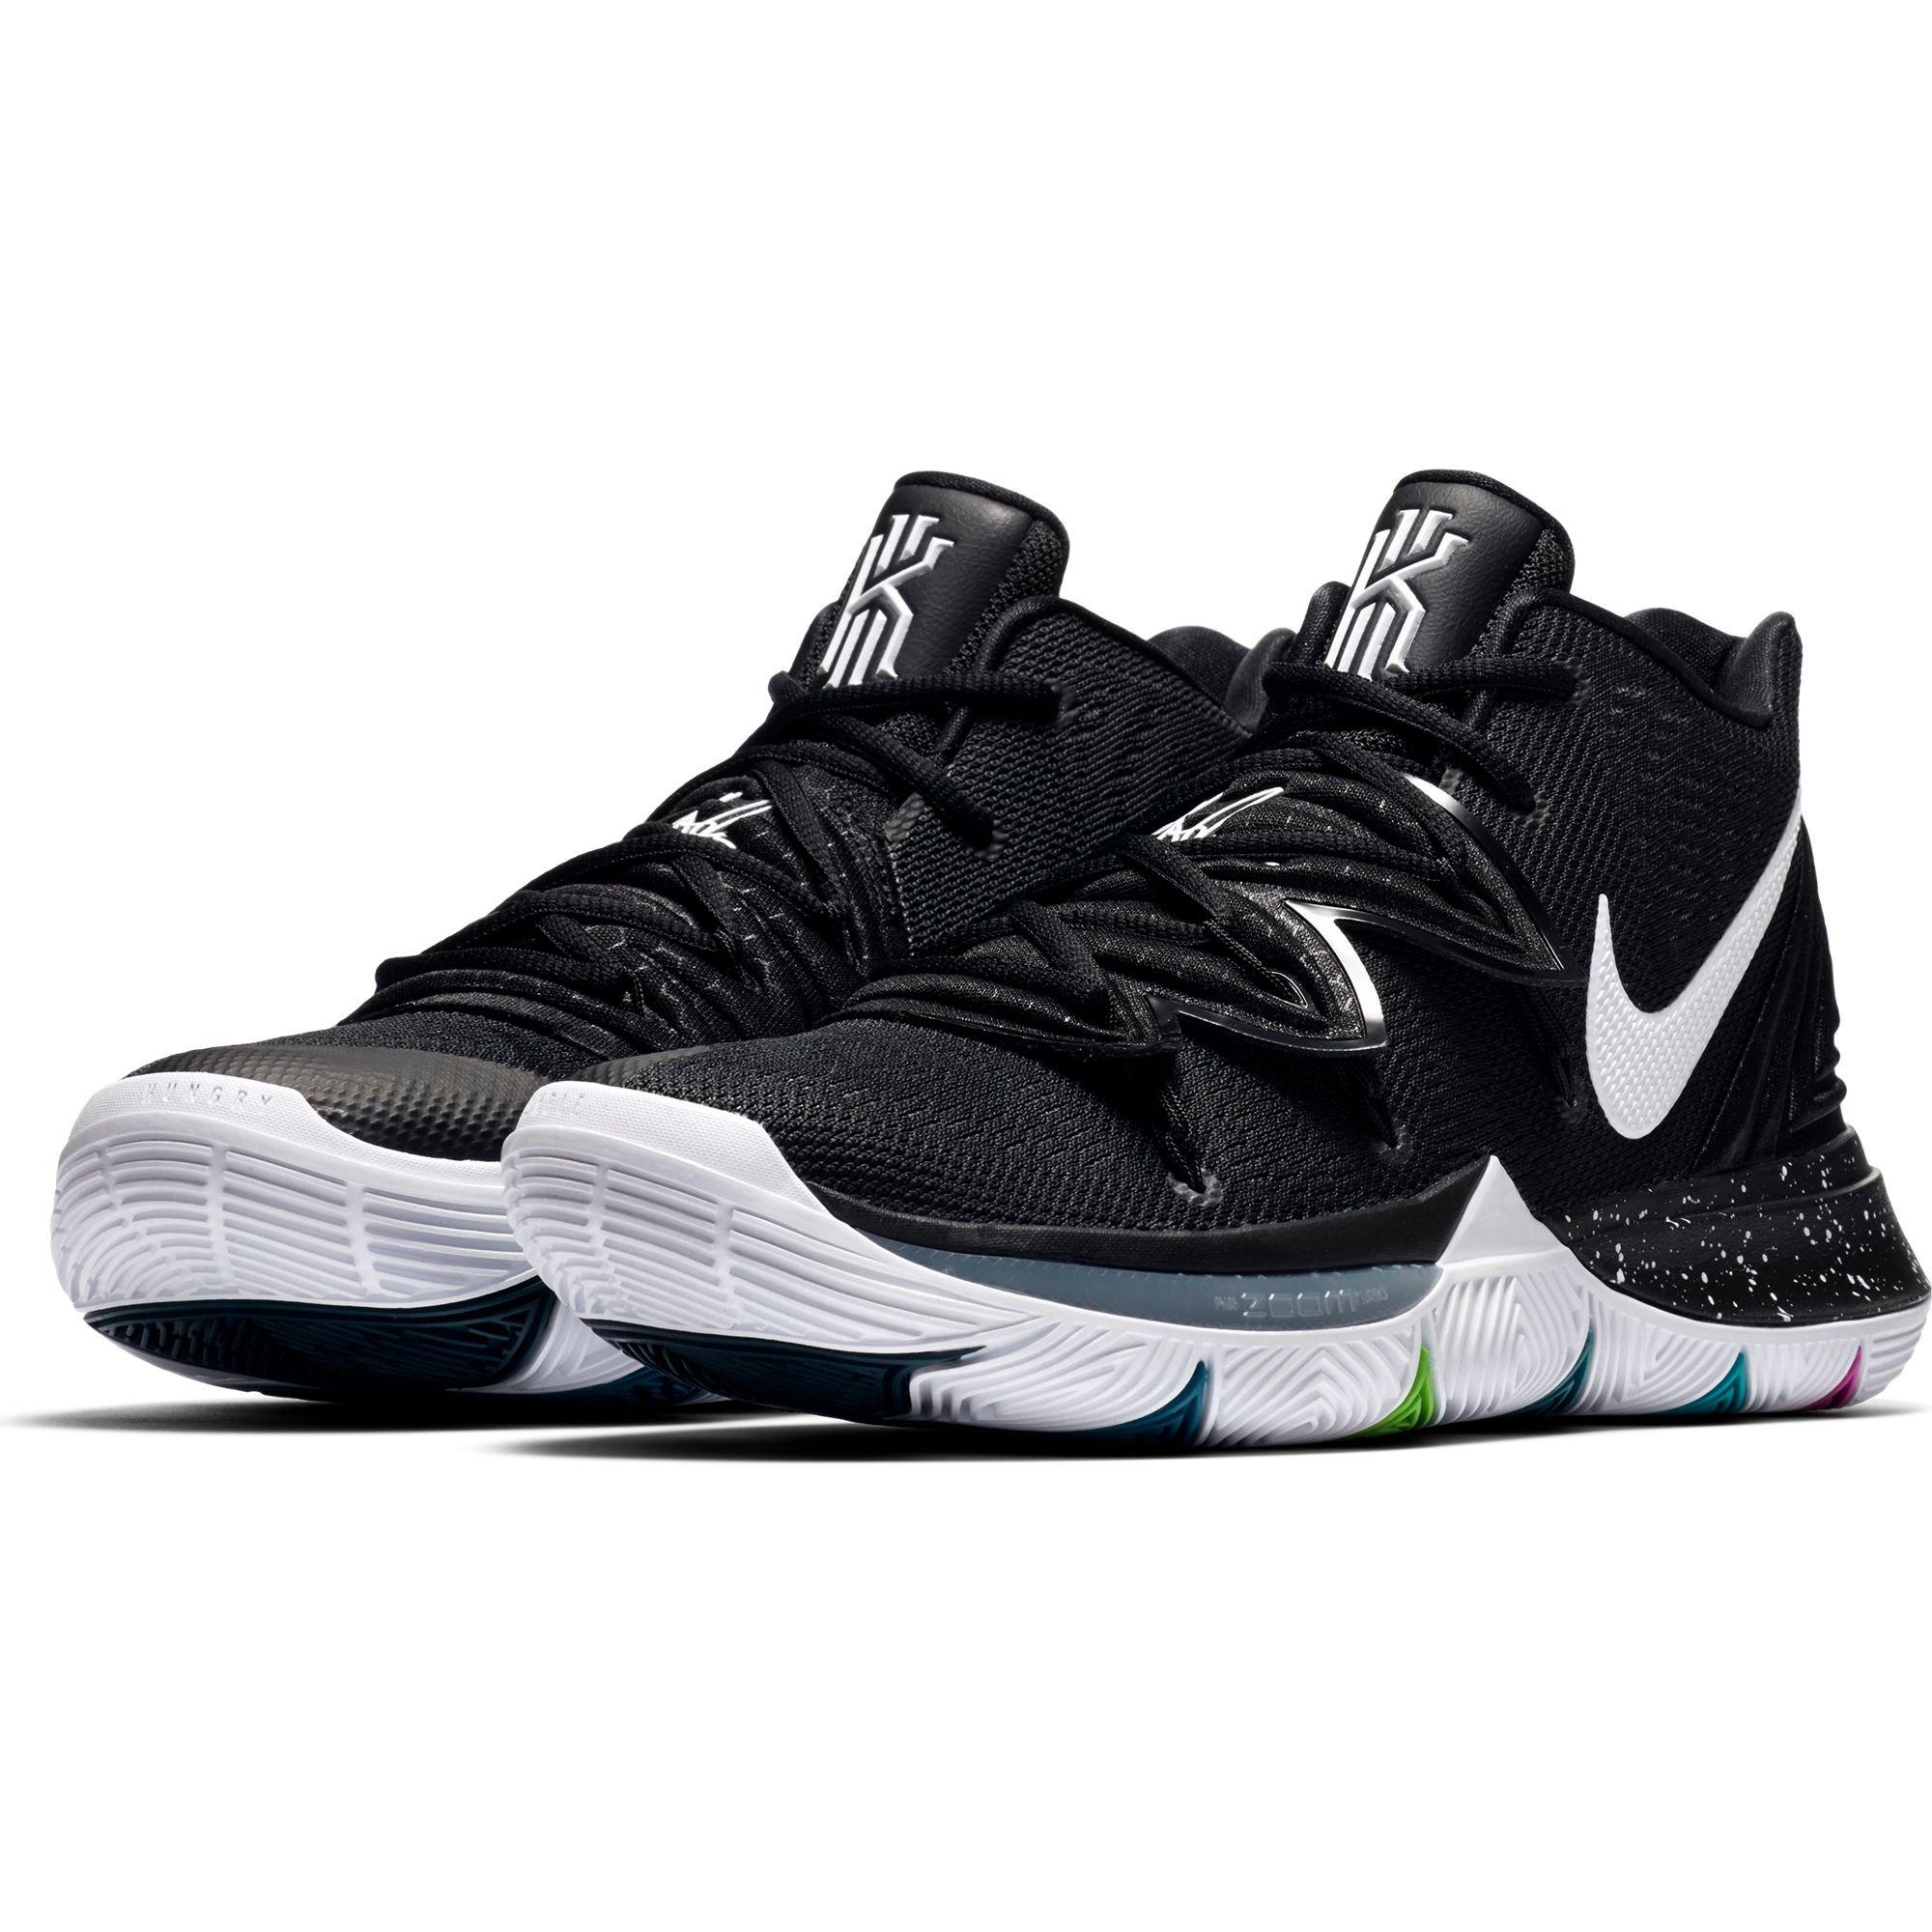 Nike Men 's Kyrie 5 Basketball Shoes Black Nike volleyball